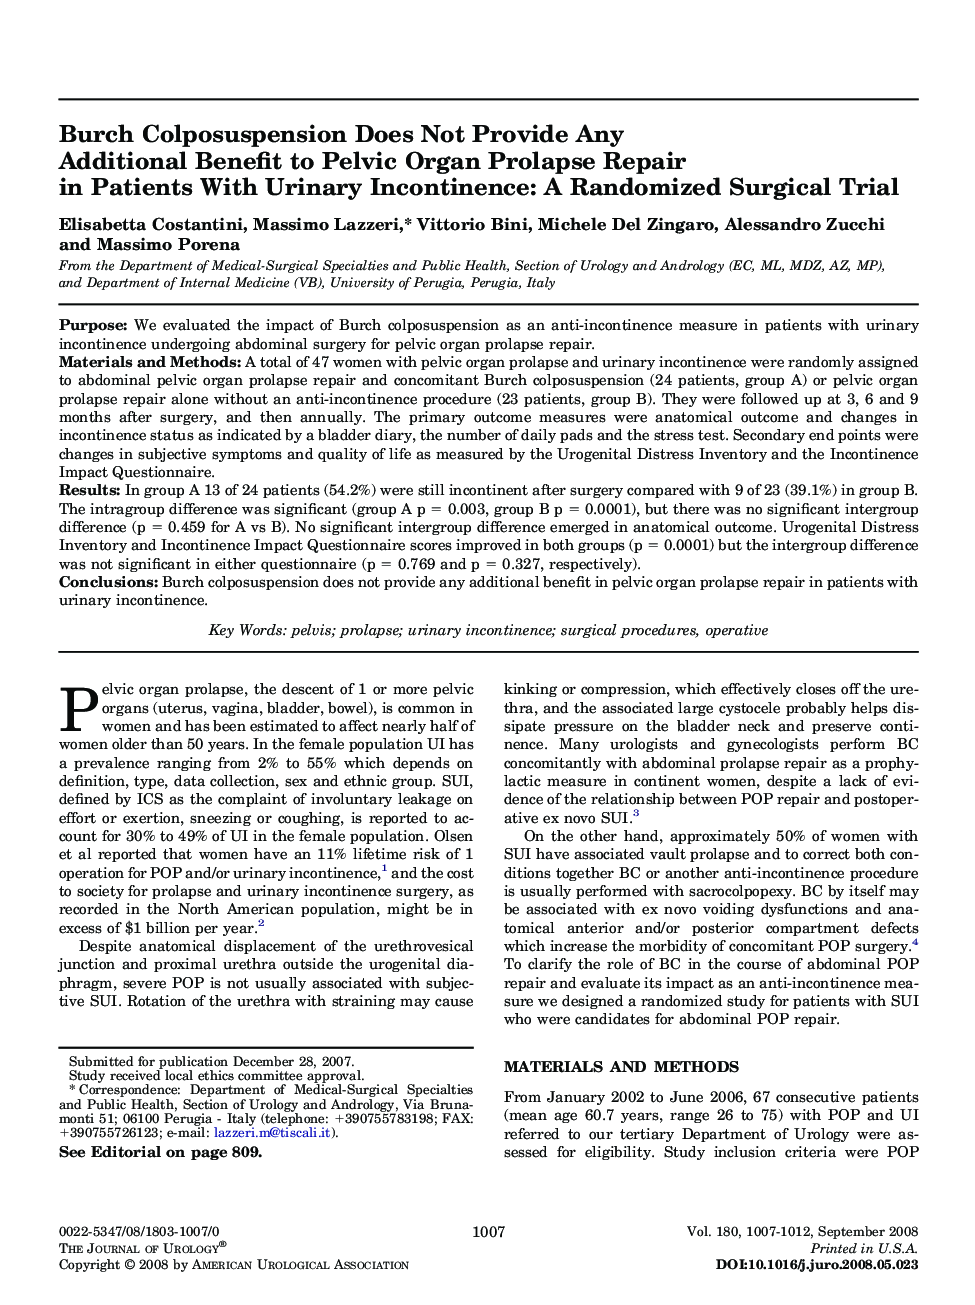 Burch Colposuspension Does Not Provide Any Additional Benefit to Pelvic Organ Prolapse Repair in Patients With Urinary Incontinence: A Randomized Surgical Trial